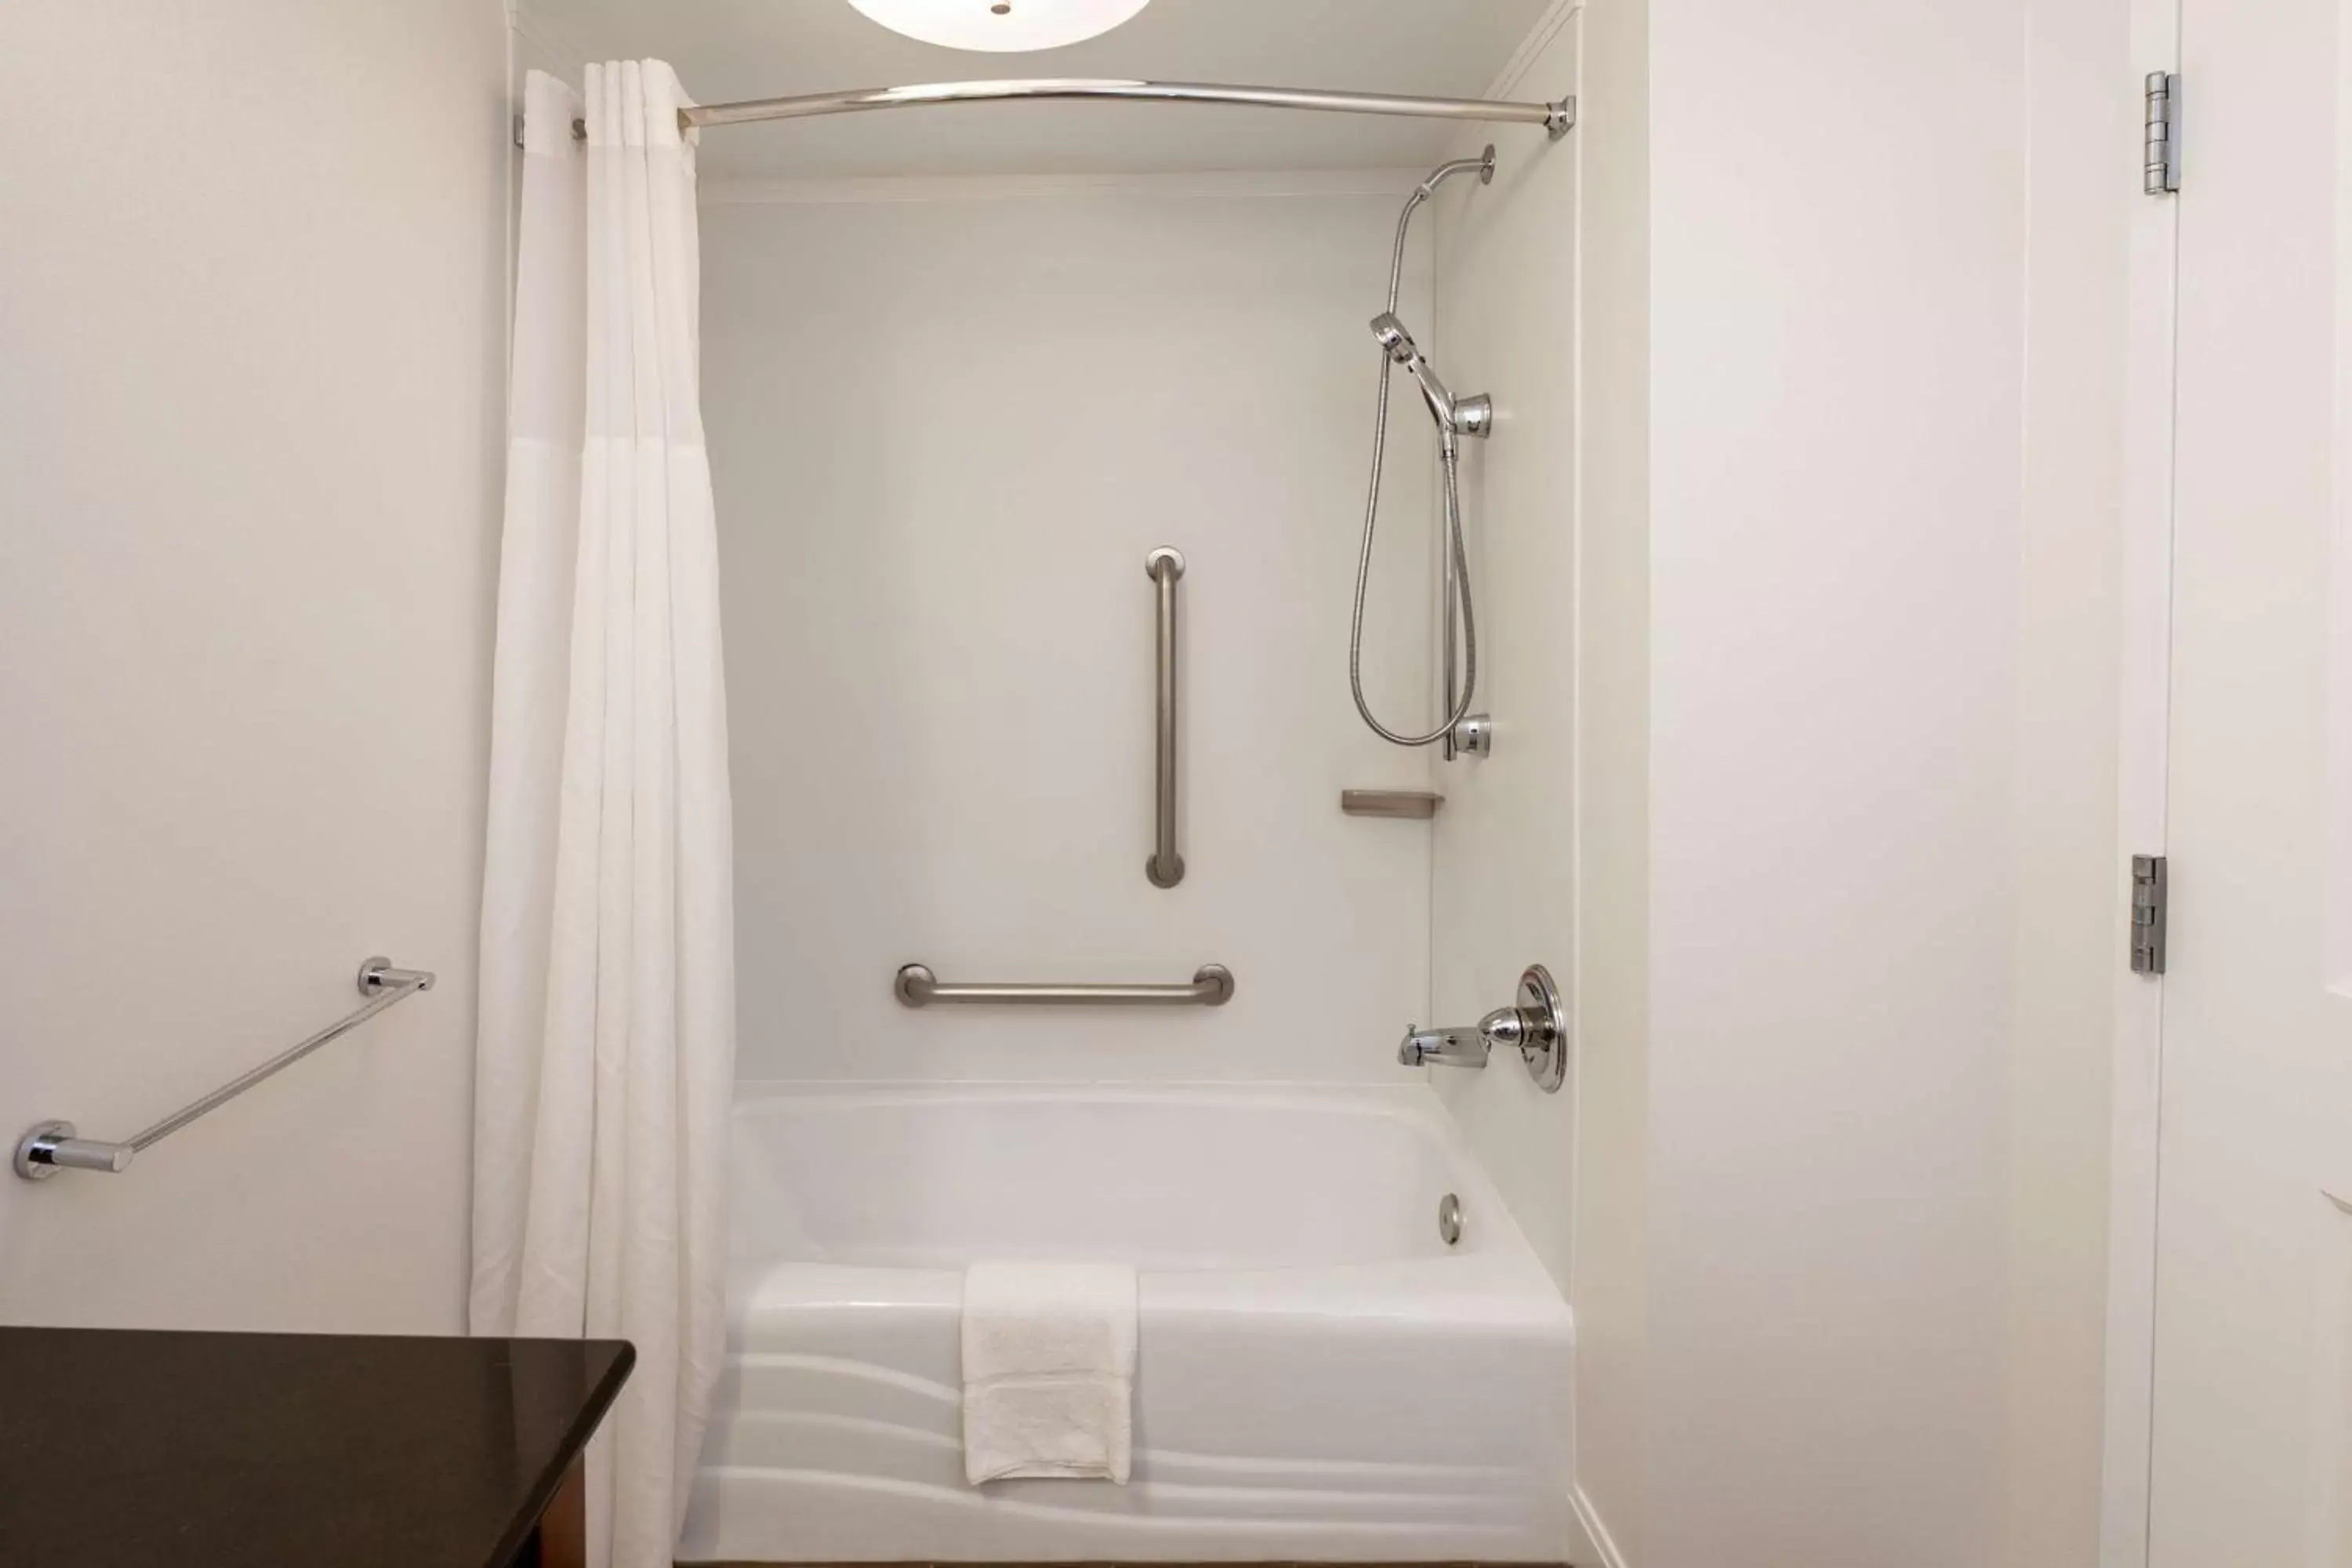 Bathroom in Hampton Inn & Suites Raleigh/Cary I-40 (PNC Arena)